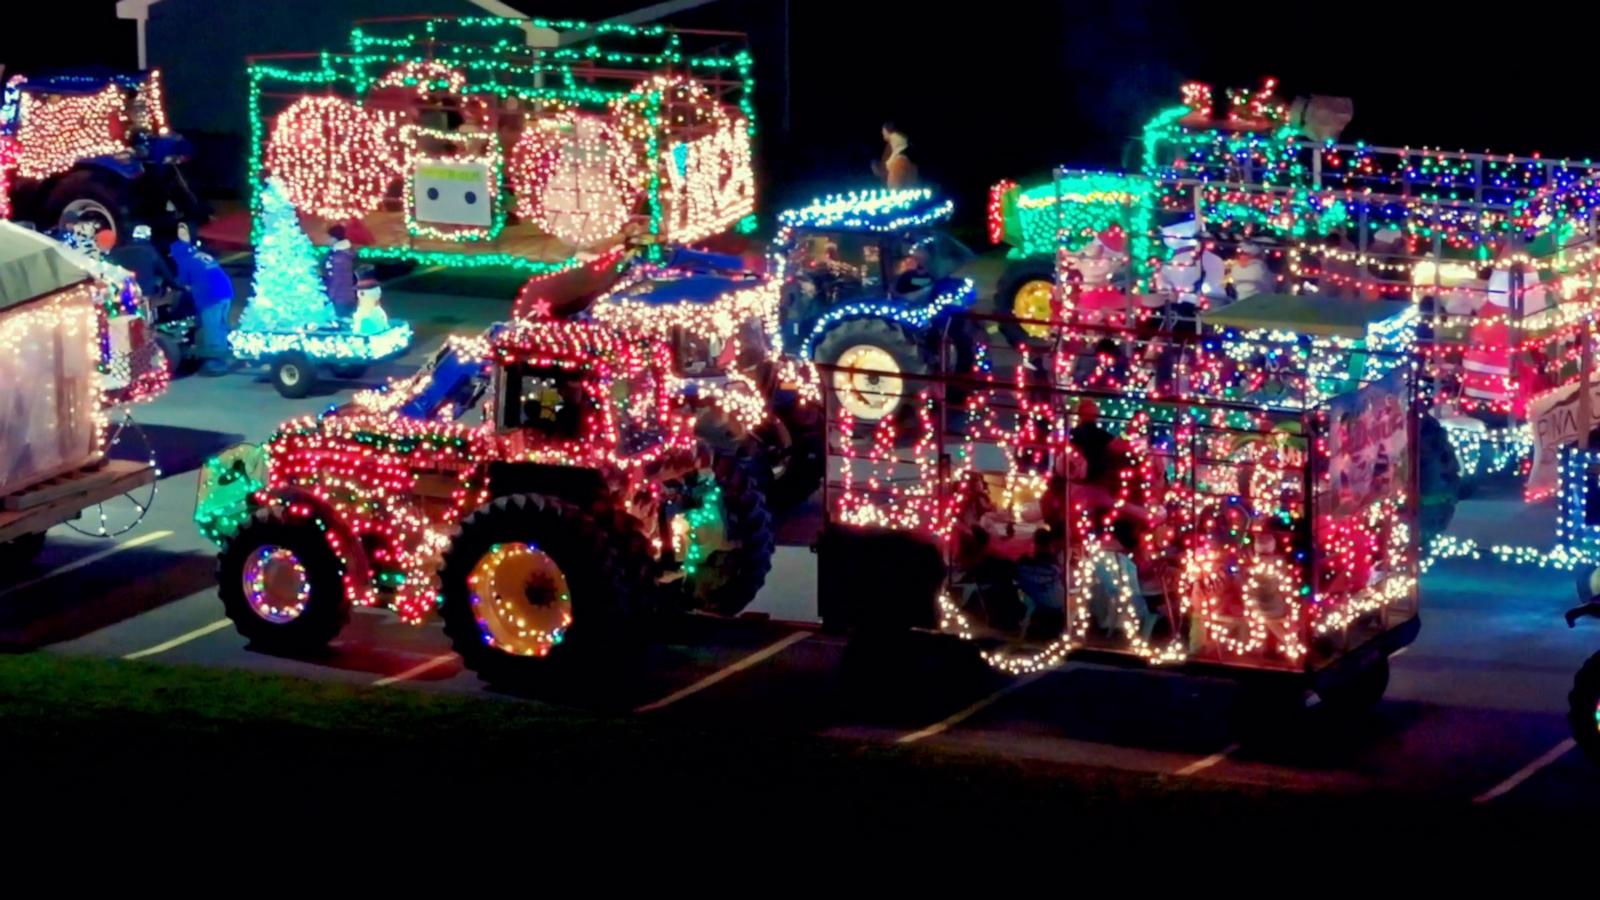 Small town’s lighted tractor parade brings holiday cheer - Good Morning ...